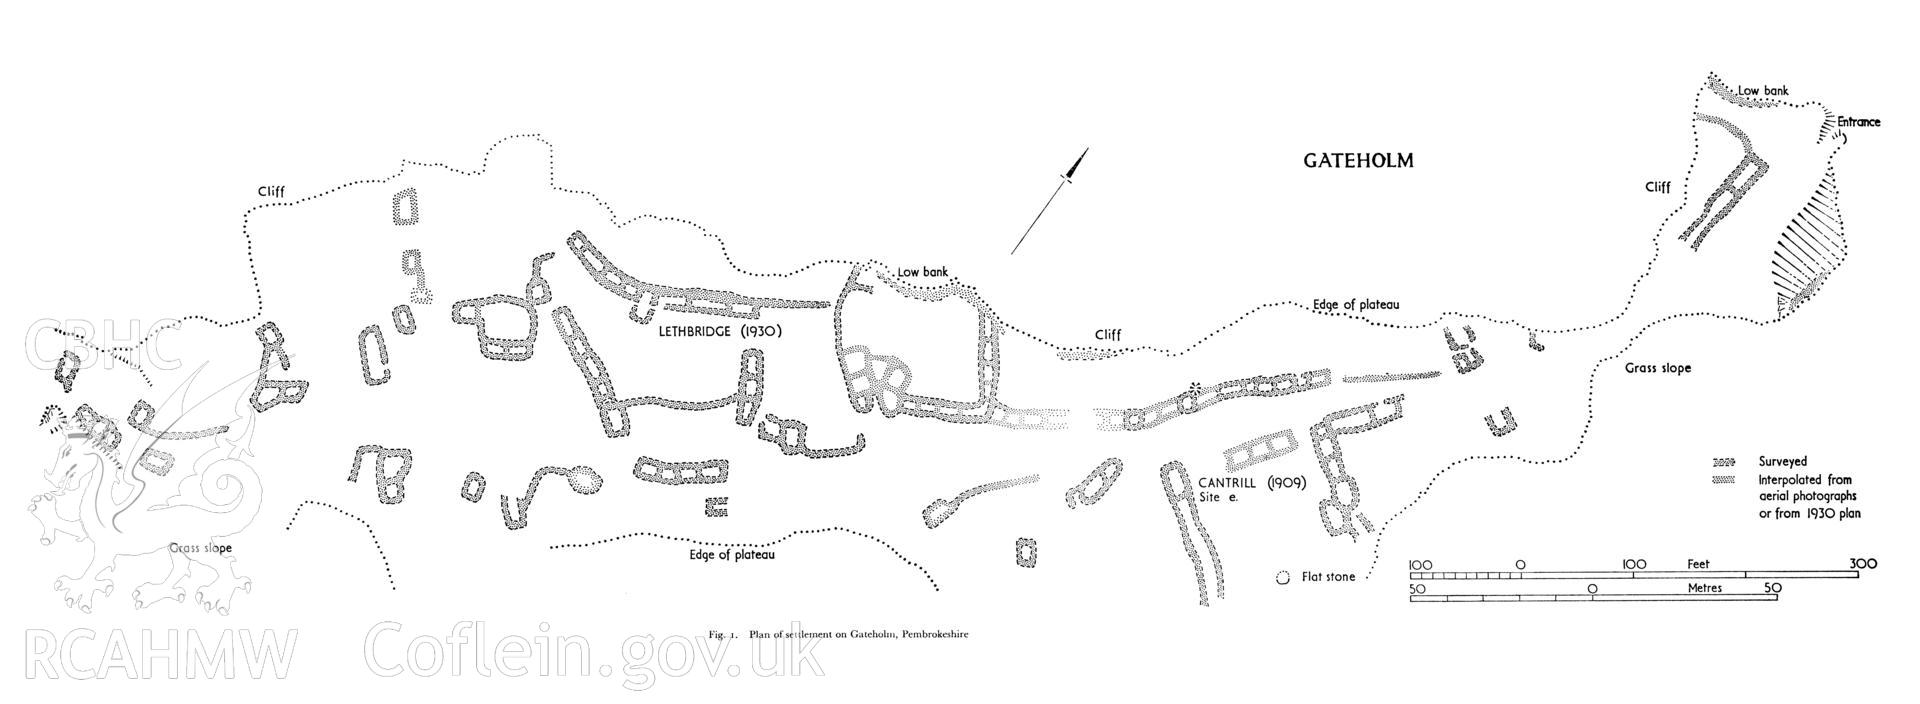 Digitized image of a measured plan of the settlement on Gateholm, Pembrokeshire as featured an article entitled  in The Hut-settlement on Gateholm, Pembrokeshire by J.L. Davies, D.B. Hague and A.H.A. Hogg, published in Archaelogia Cambrensis volume CXX (1971)